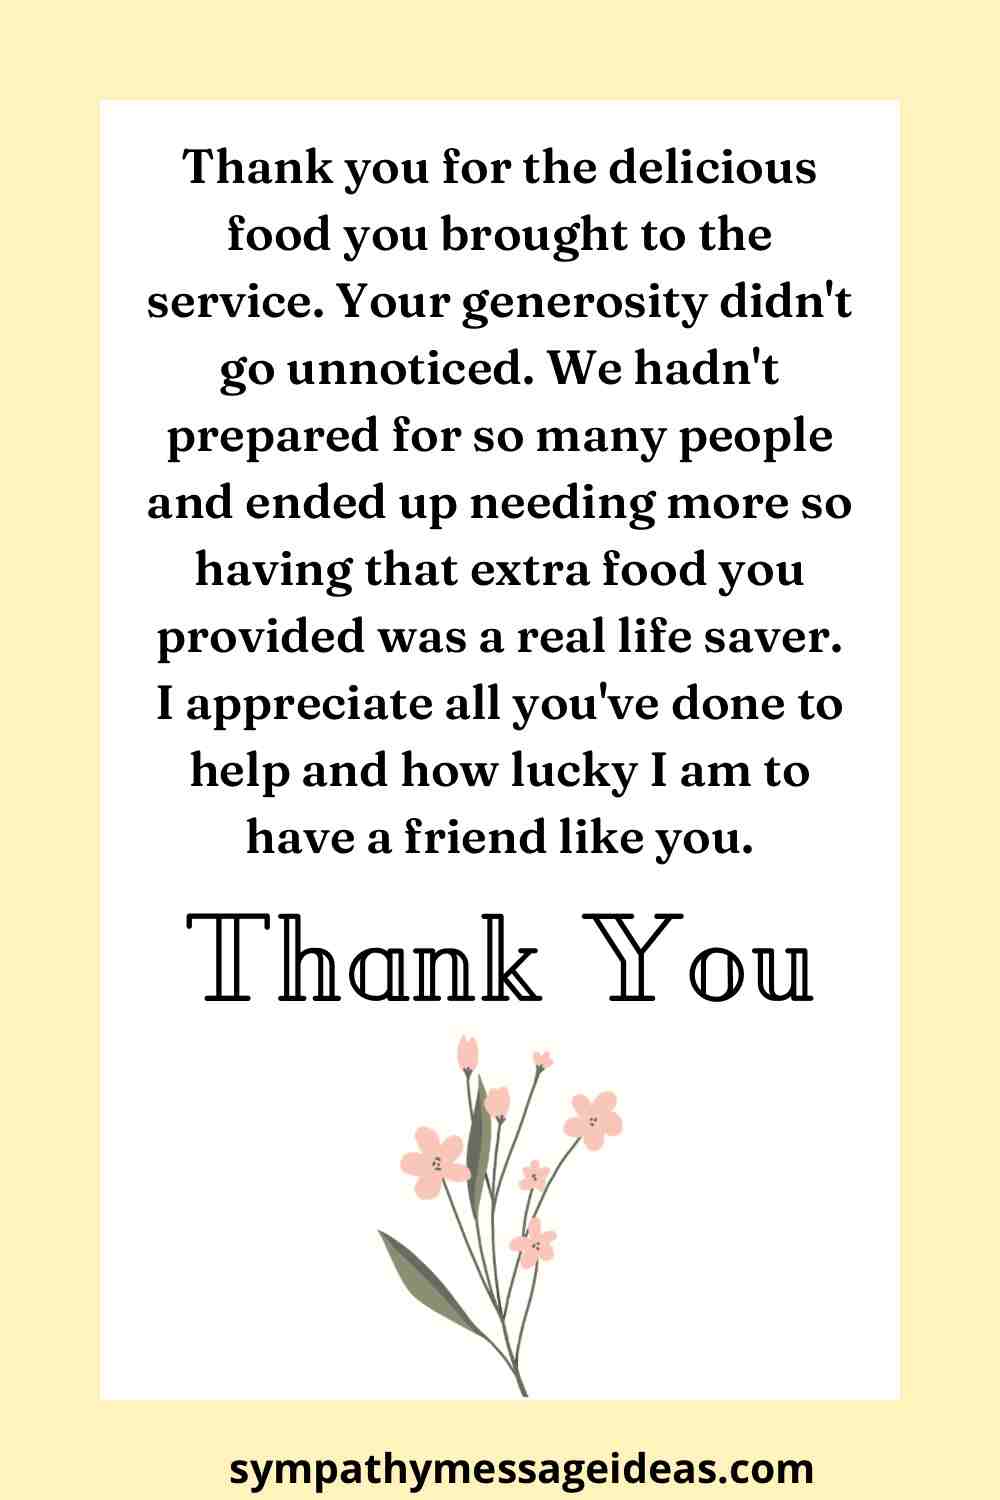 How To Write A Thank You Note For Funeral Food - Templates Printable Free